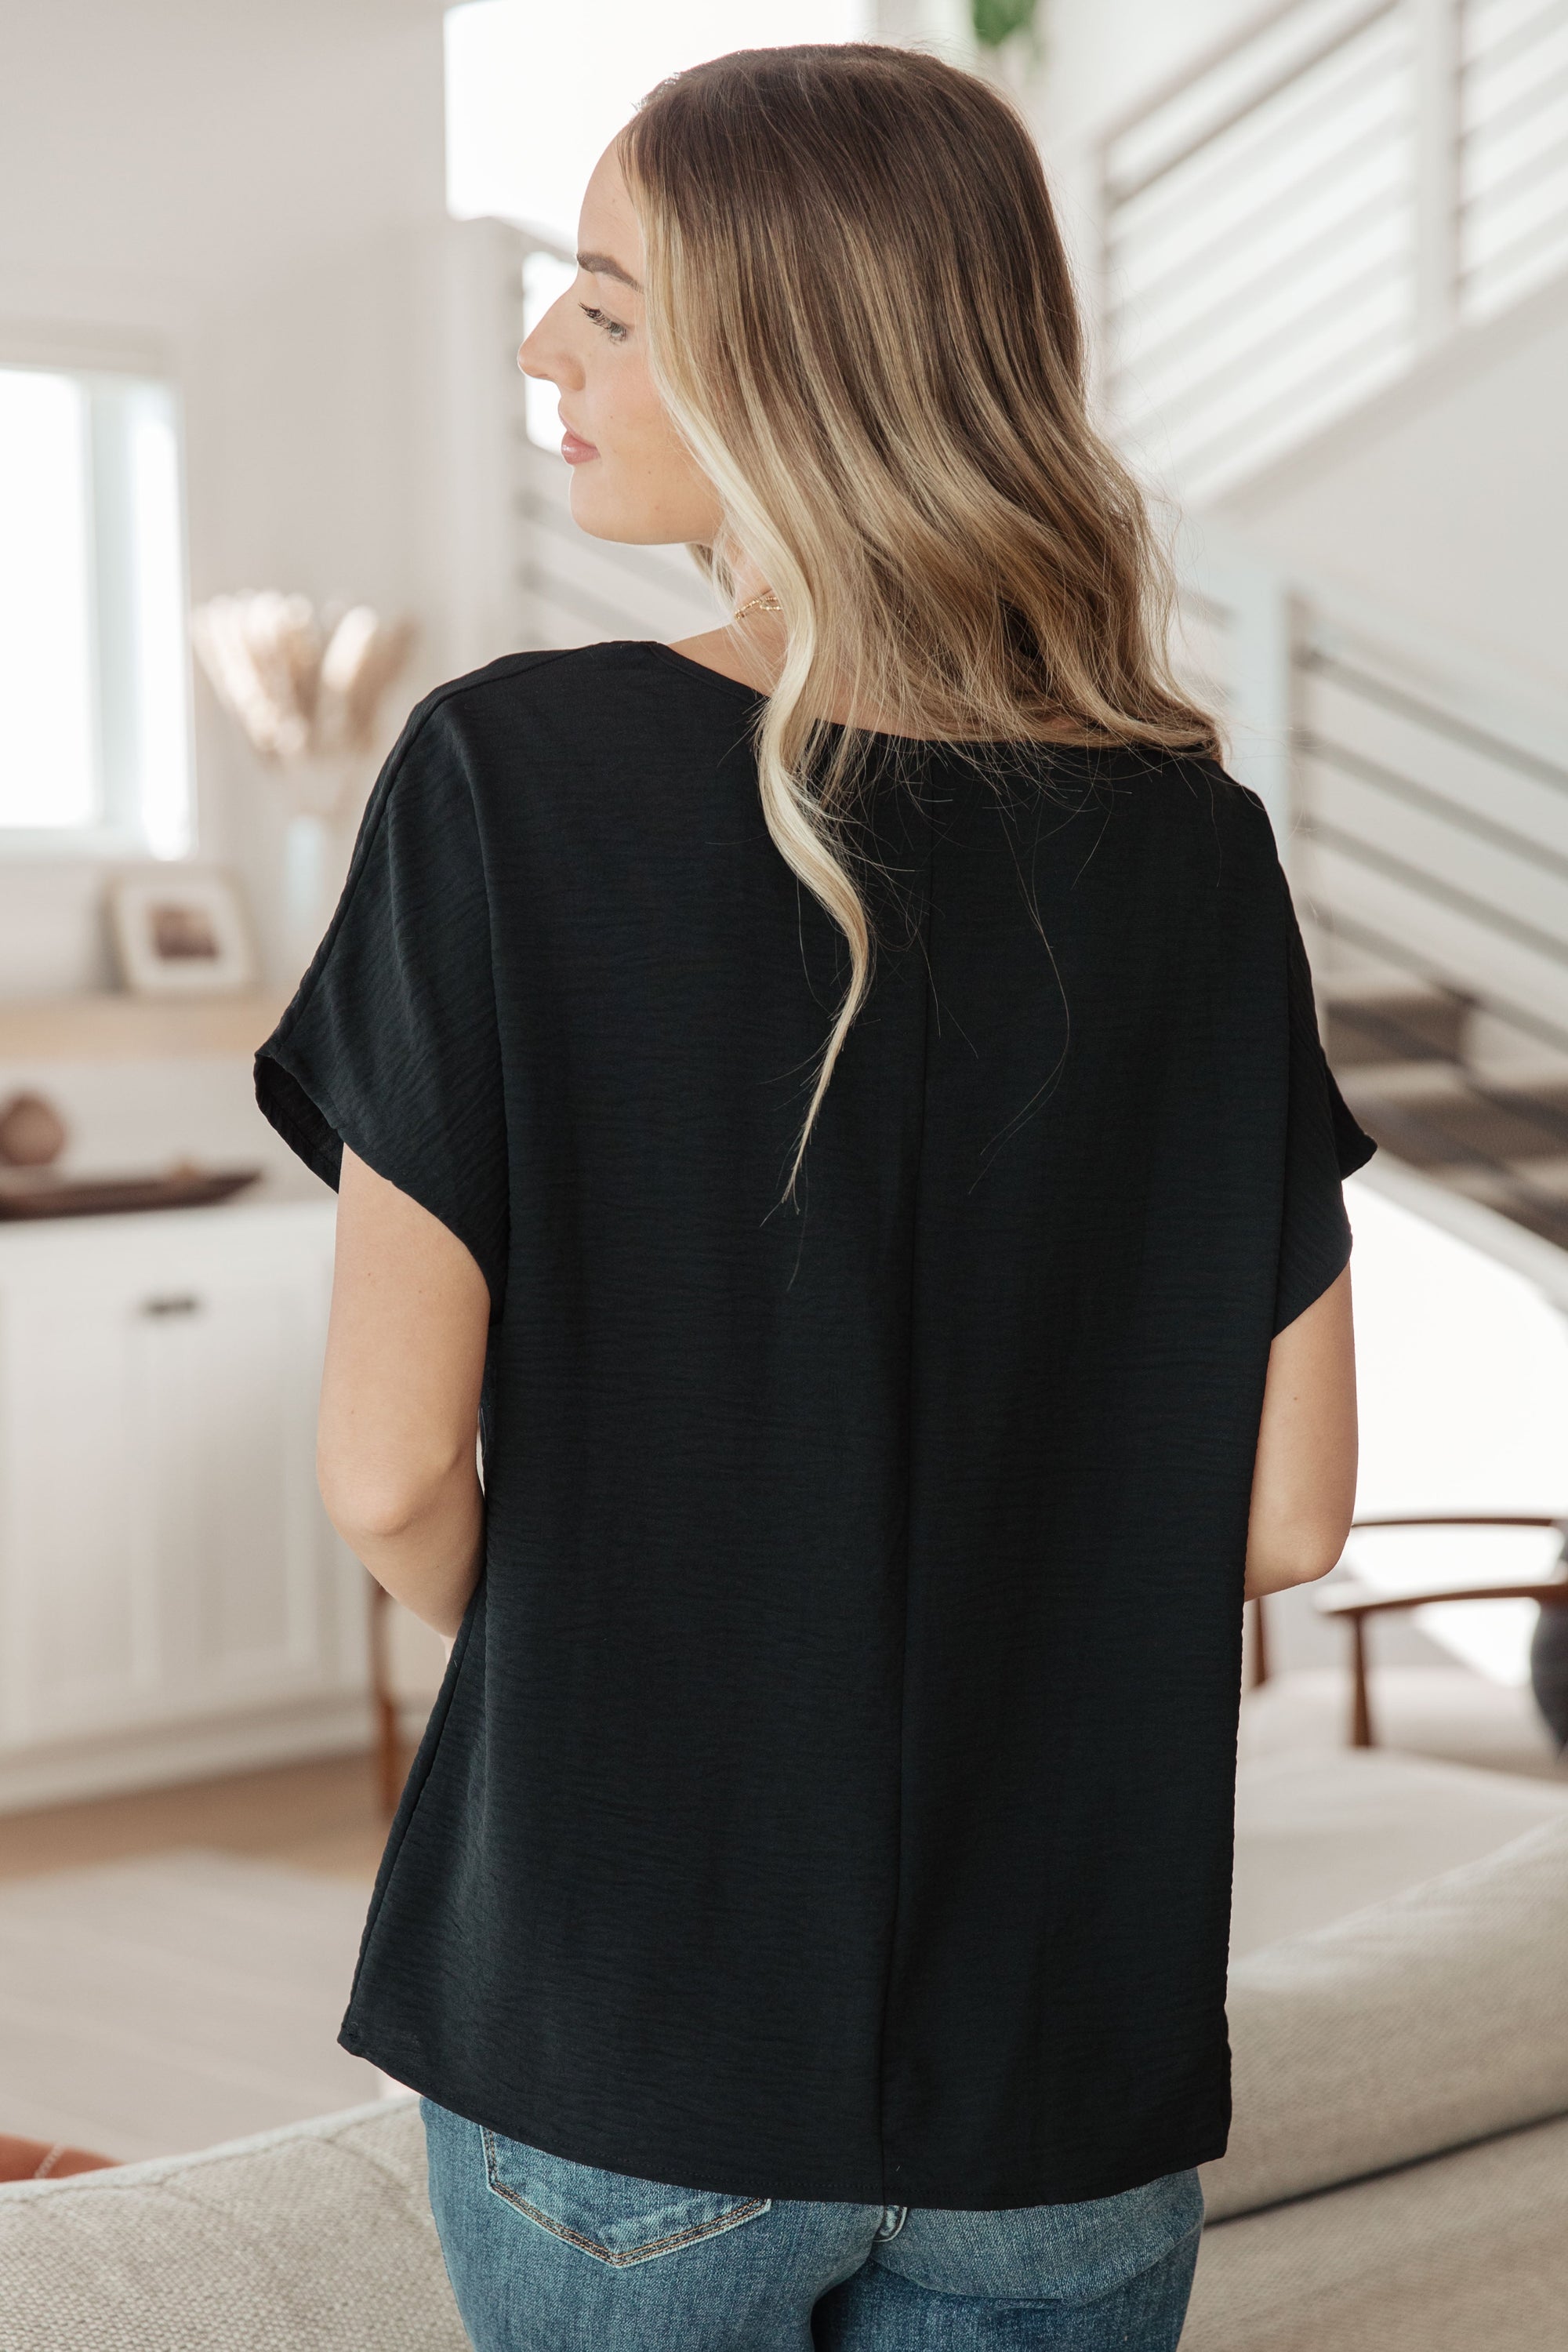 Frequently Asked Questions V-Neck Top in Black-Womens-AllyKat Boutique Shop for Women & Kids